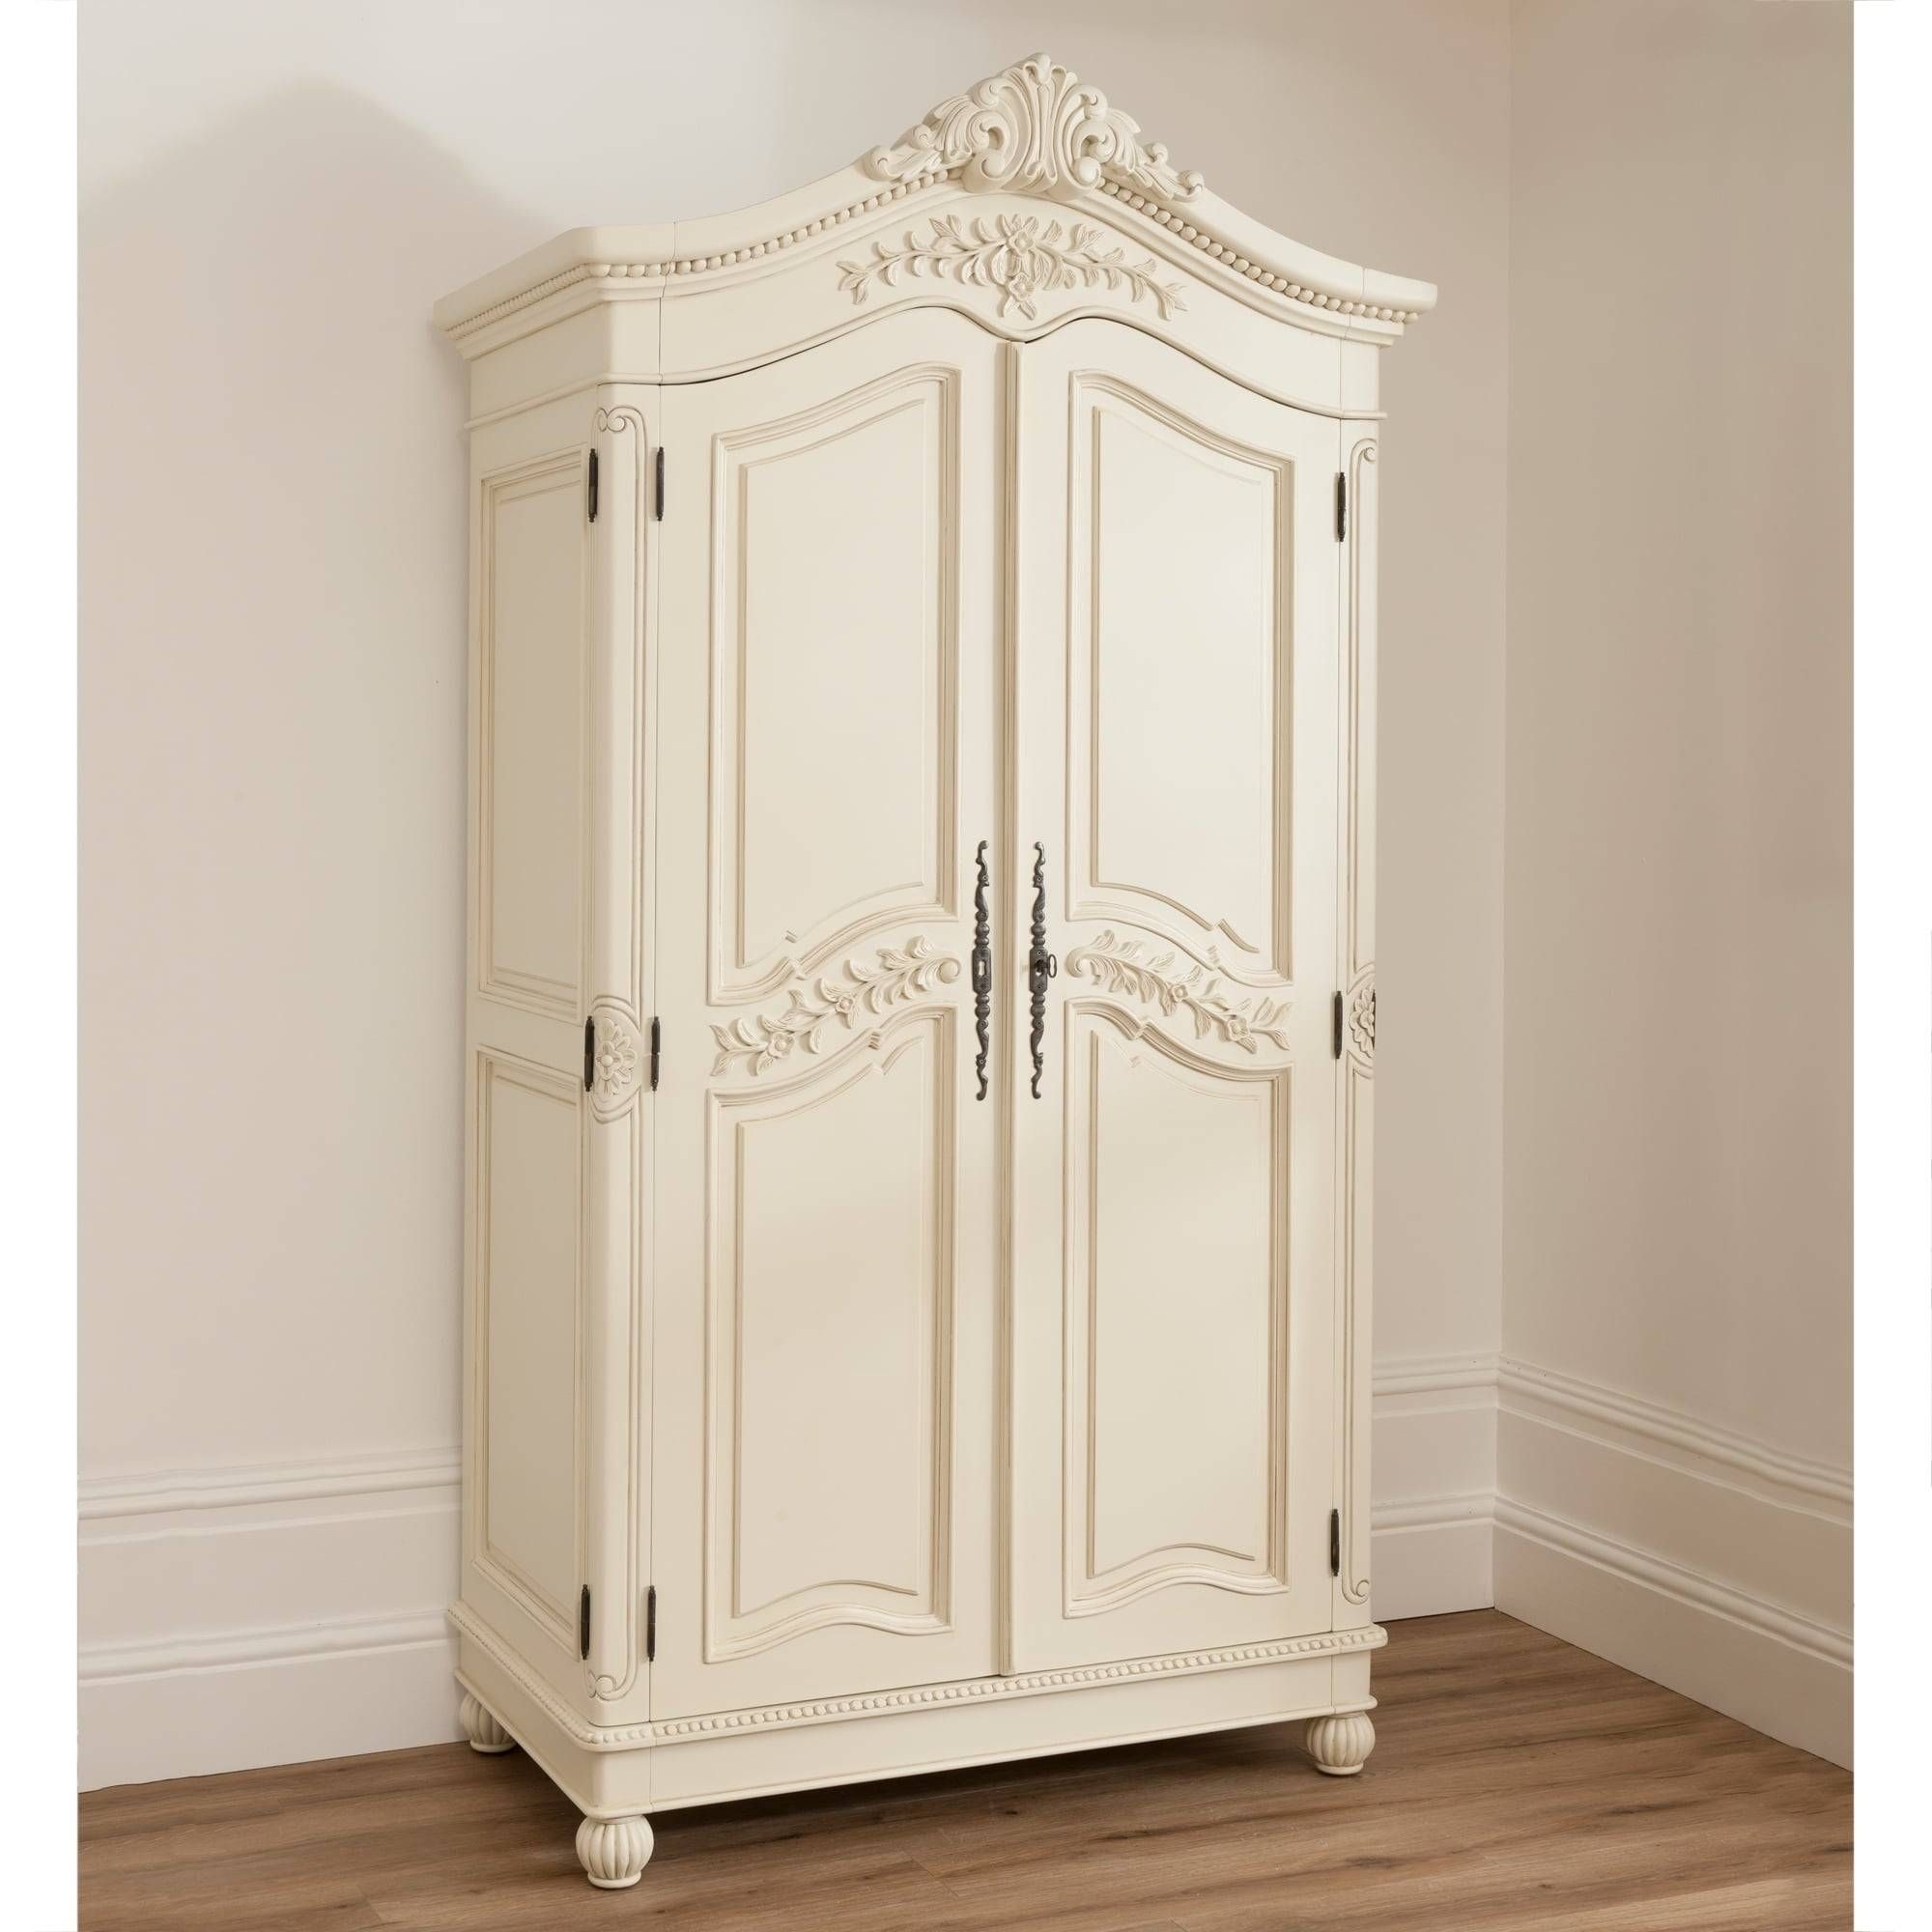 Bordeaux Ivory Shabby Chic Wardrobe | Shabby Chic Furniture For Shabby Chic Wardrobes (View 3 of 15)